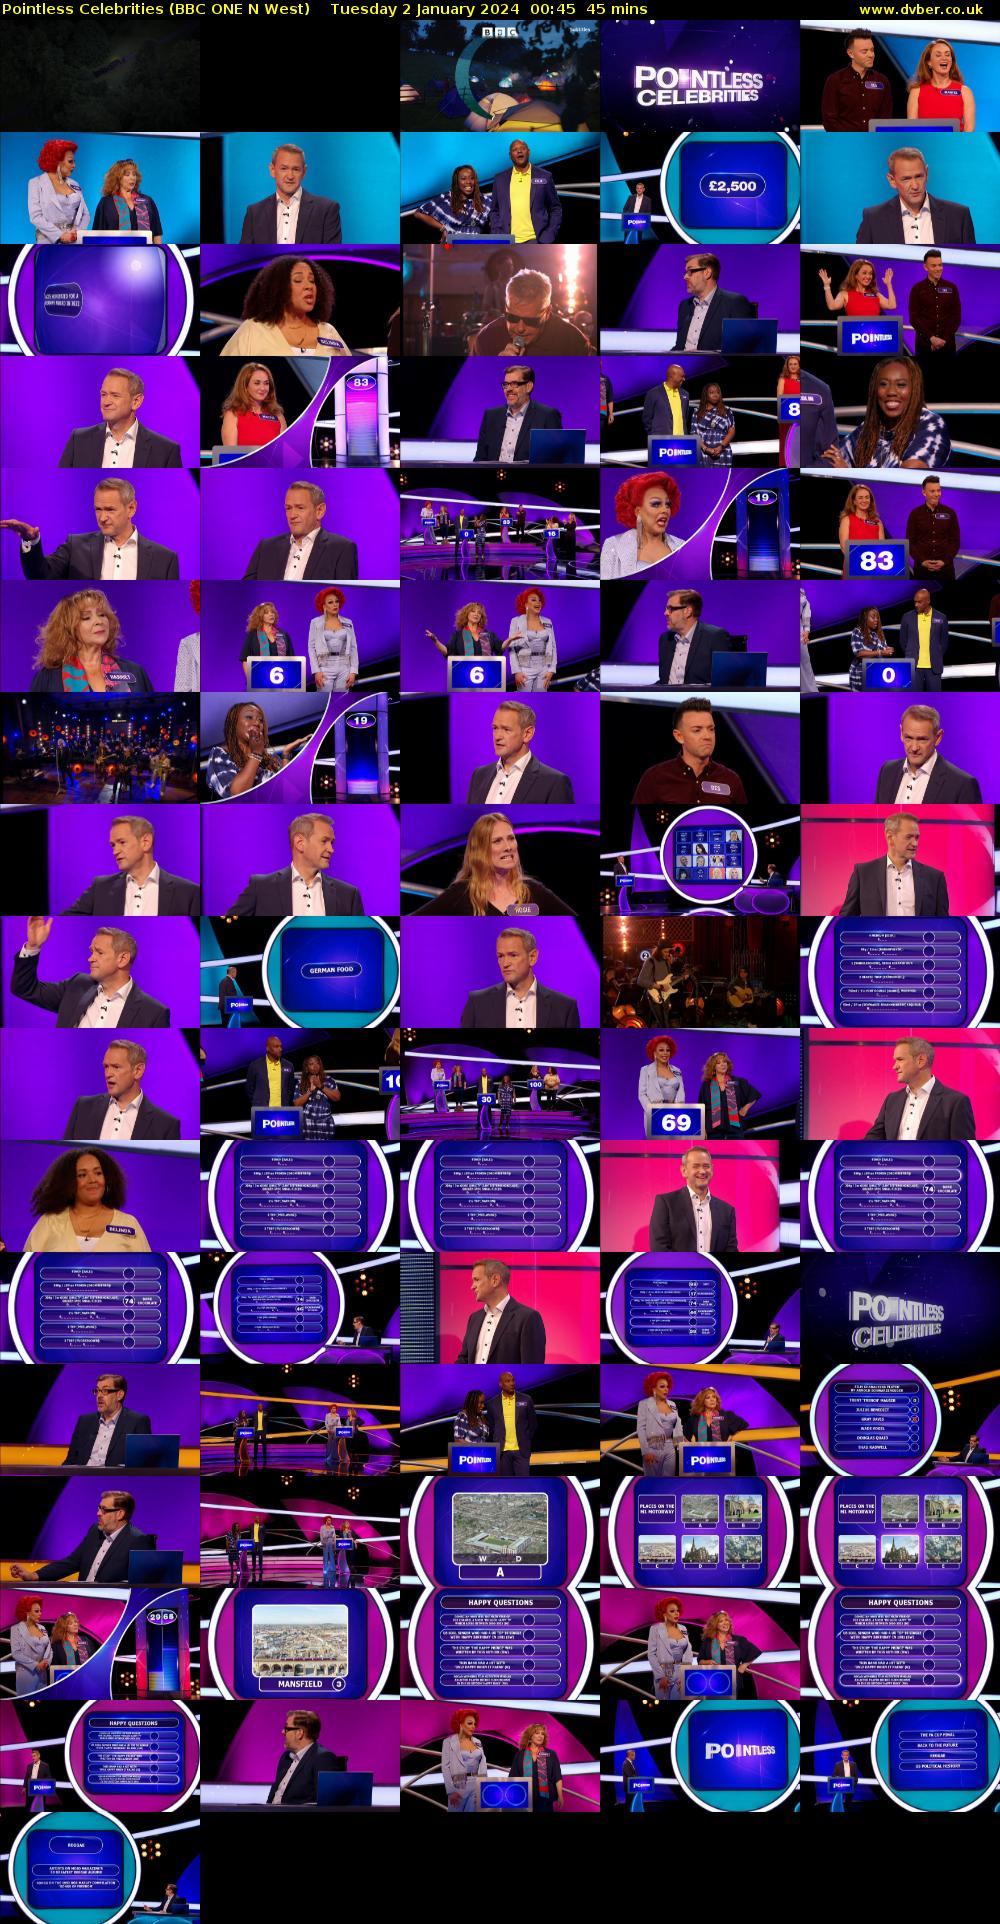 Pointless Celebrities (BBC ONE N West) Tuesday 2 January 2024 00:45 - 01:30